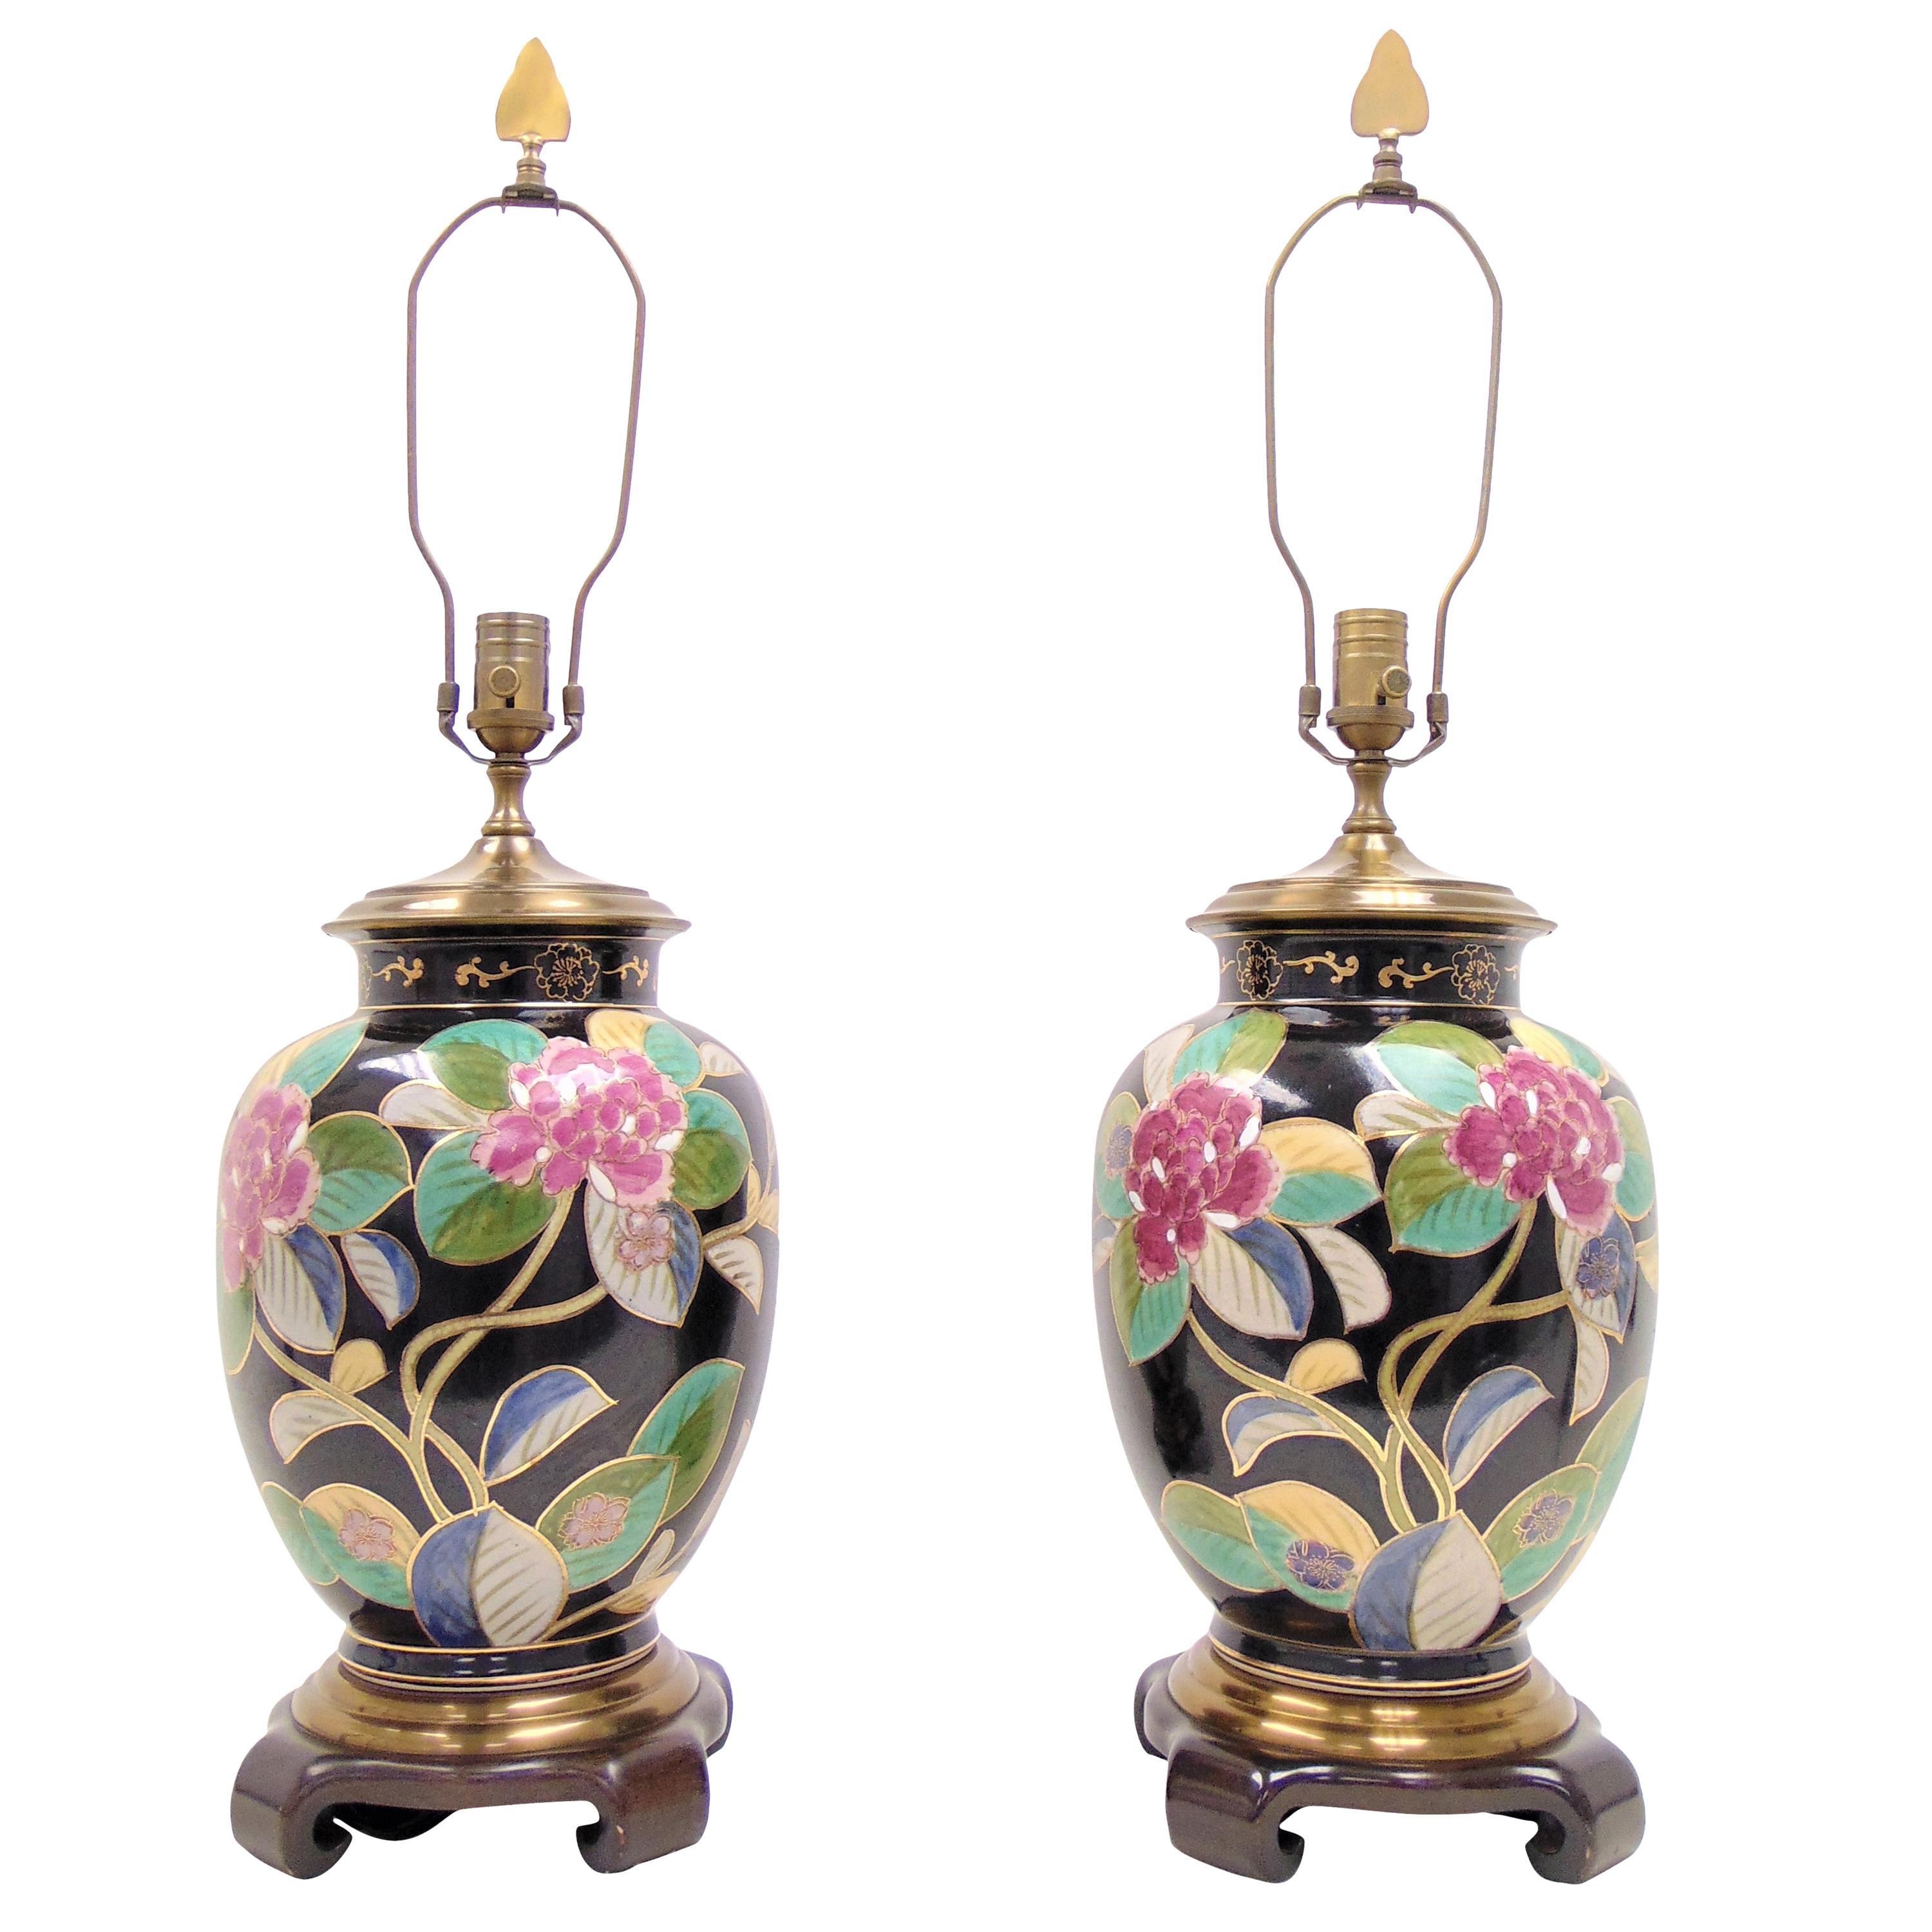 Pair of Hand Painted Ceramic Floral Urn Style Table Lamps by Wildwood Lamps For Sale